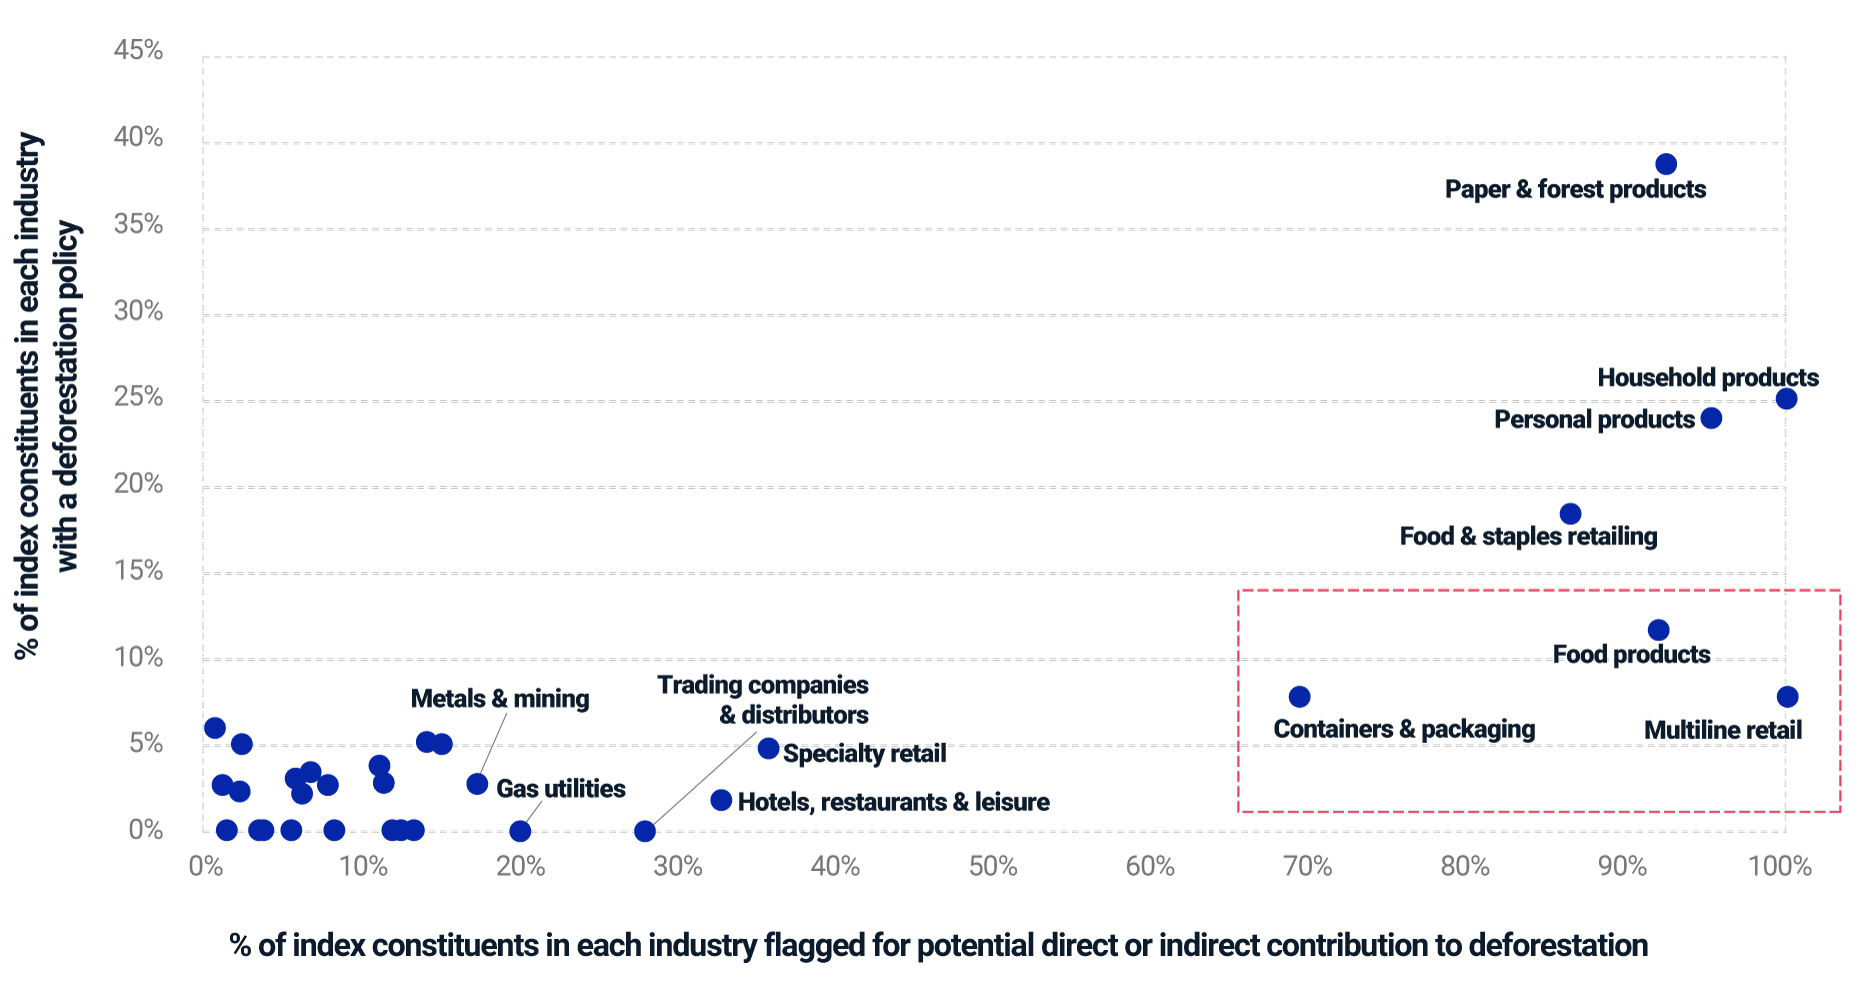 This chart highlights industries flagged for potential direct or indirect contribution to deforestation and shows how many companies within each industry have a deforestation policy.